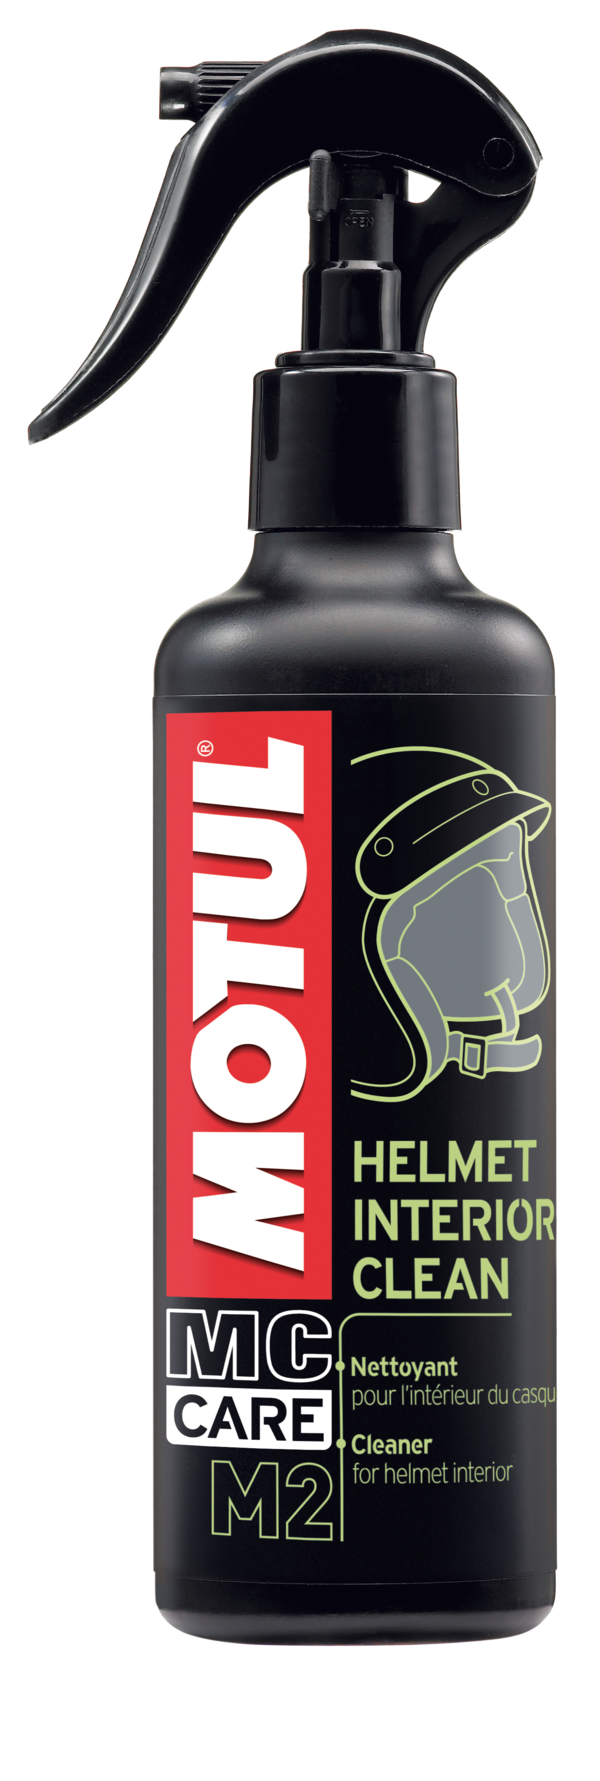 M2 HELMET INTERIOR CLEAN 0.25L - Intern Cleansing and Disinfectant Spray - Picture 1 of 1